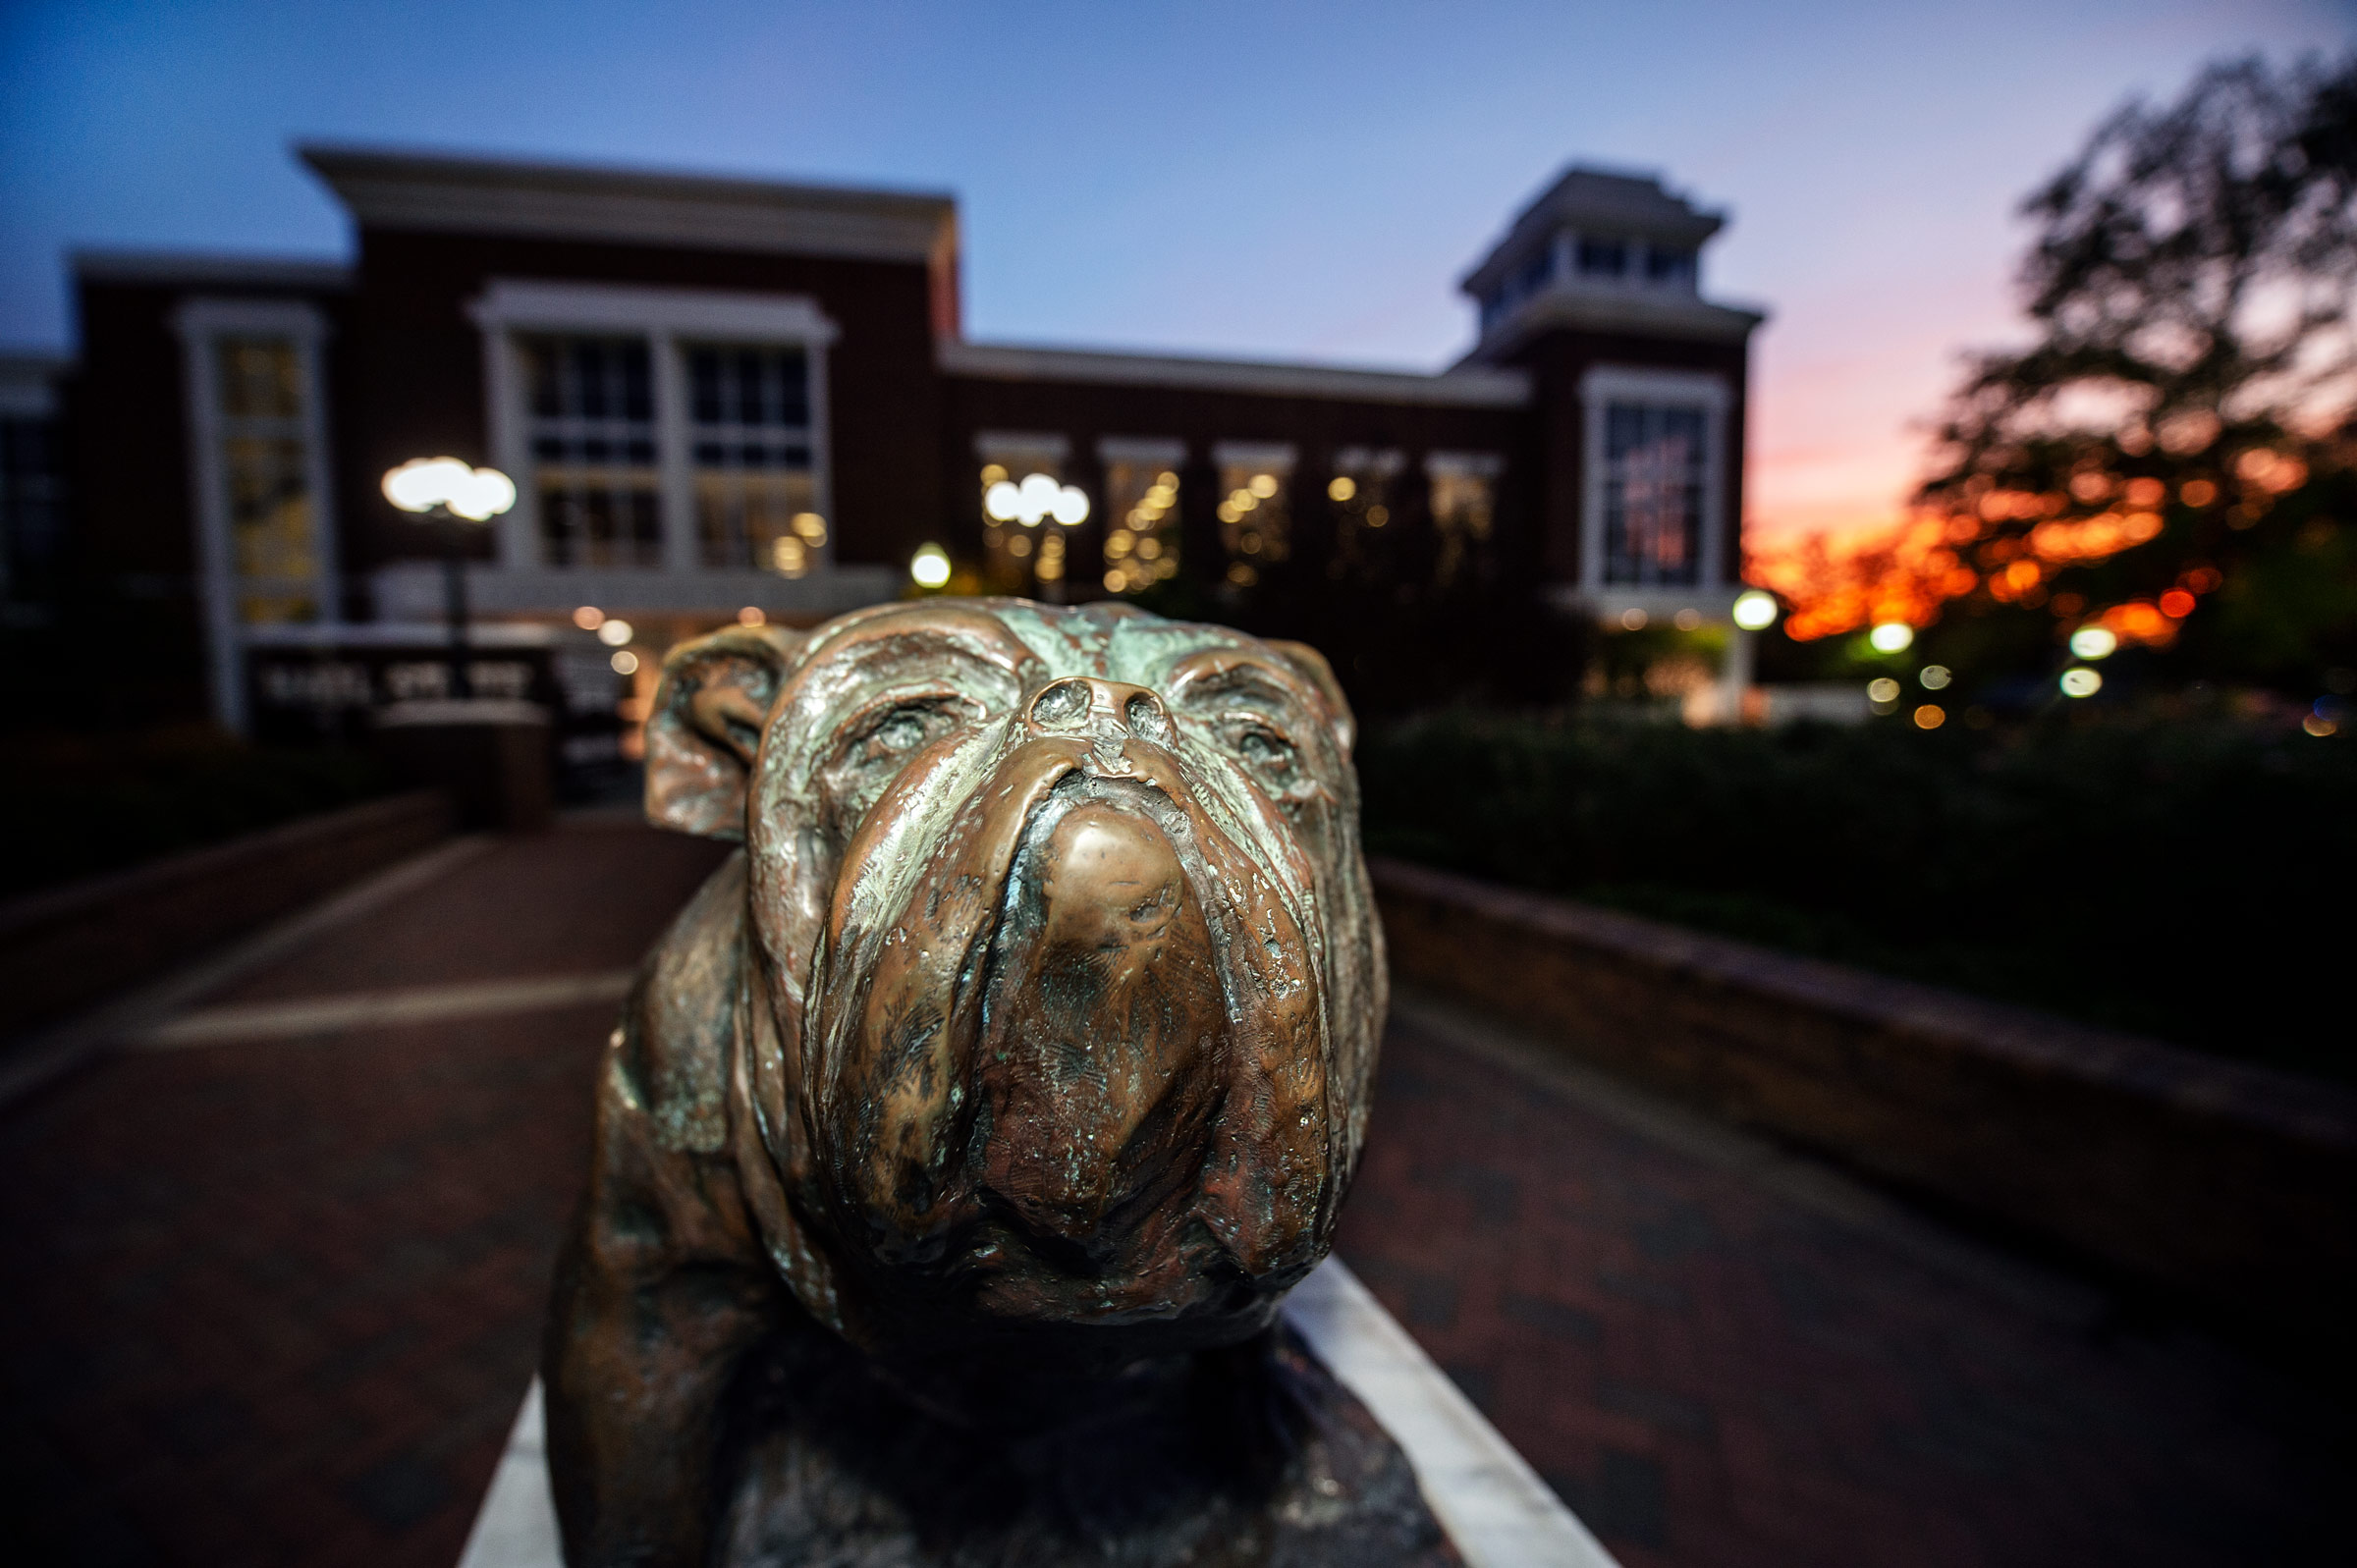 The Colvard Union Bully fills the foreground, with the building and fall sunset behind.